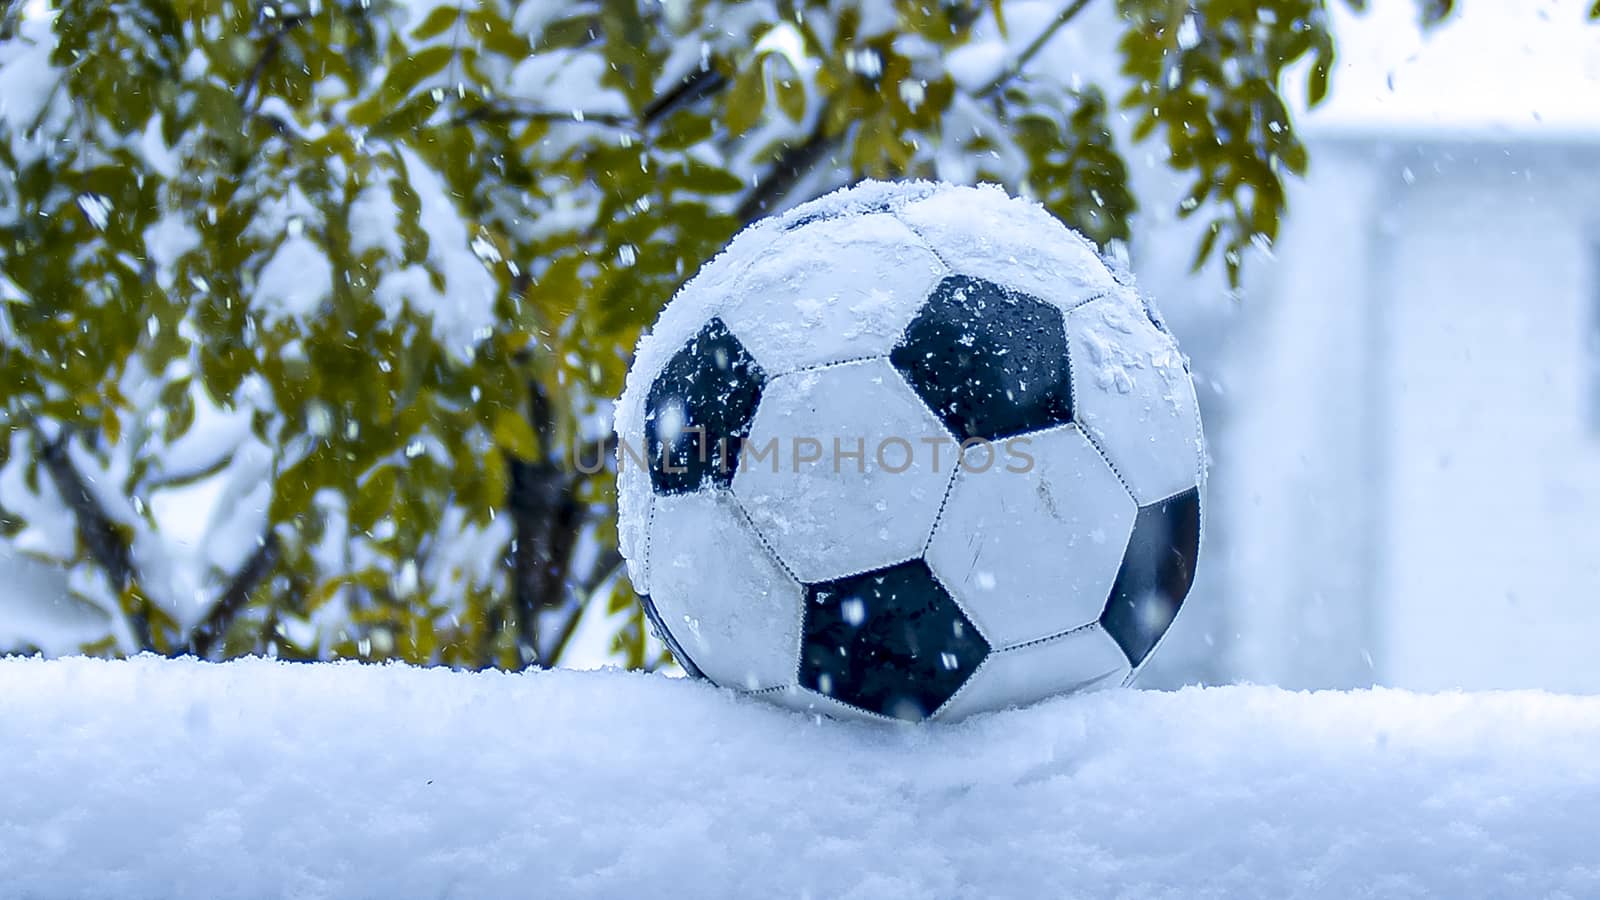 Soccer ball, football during a snowing day by oasisamuel